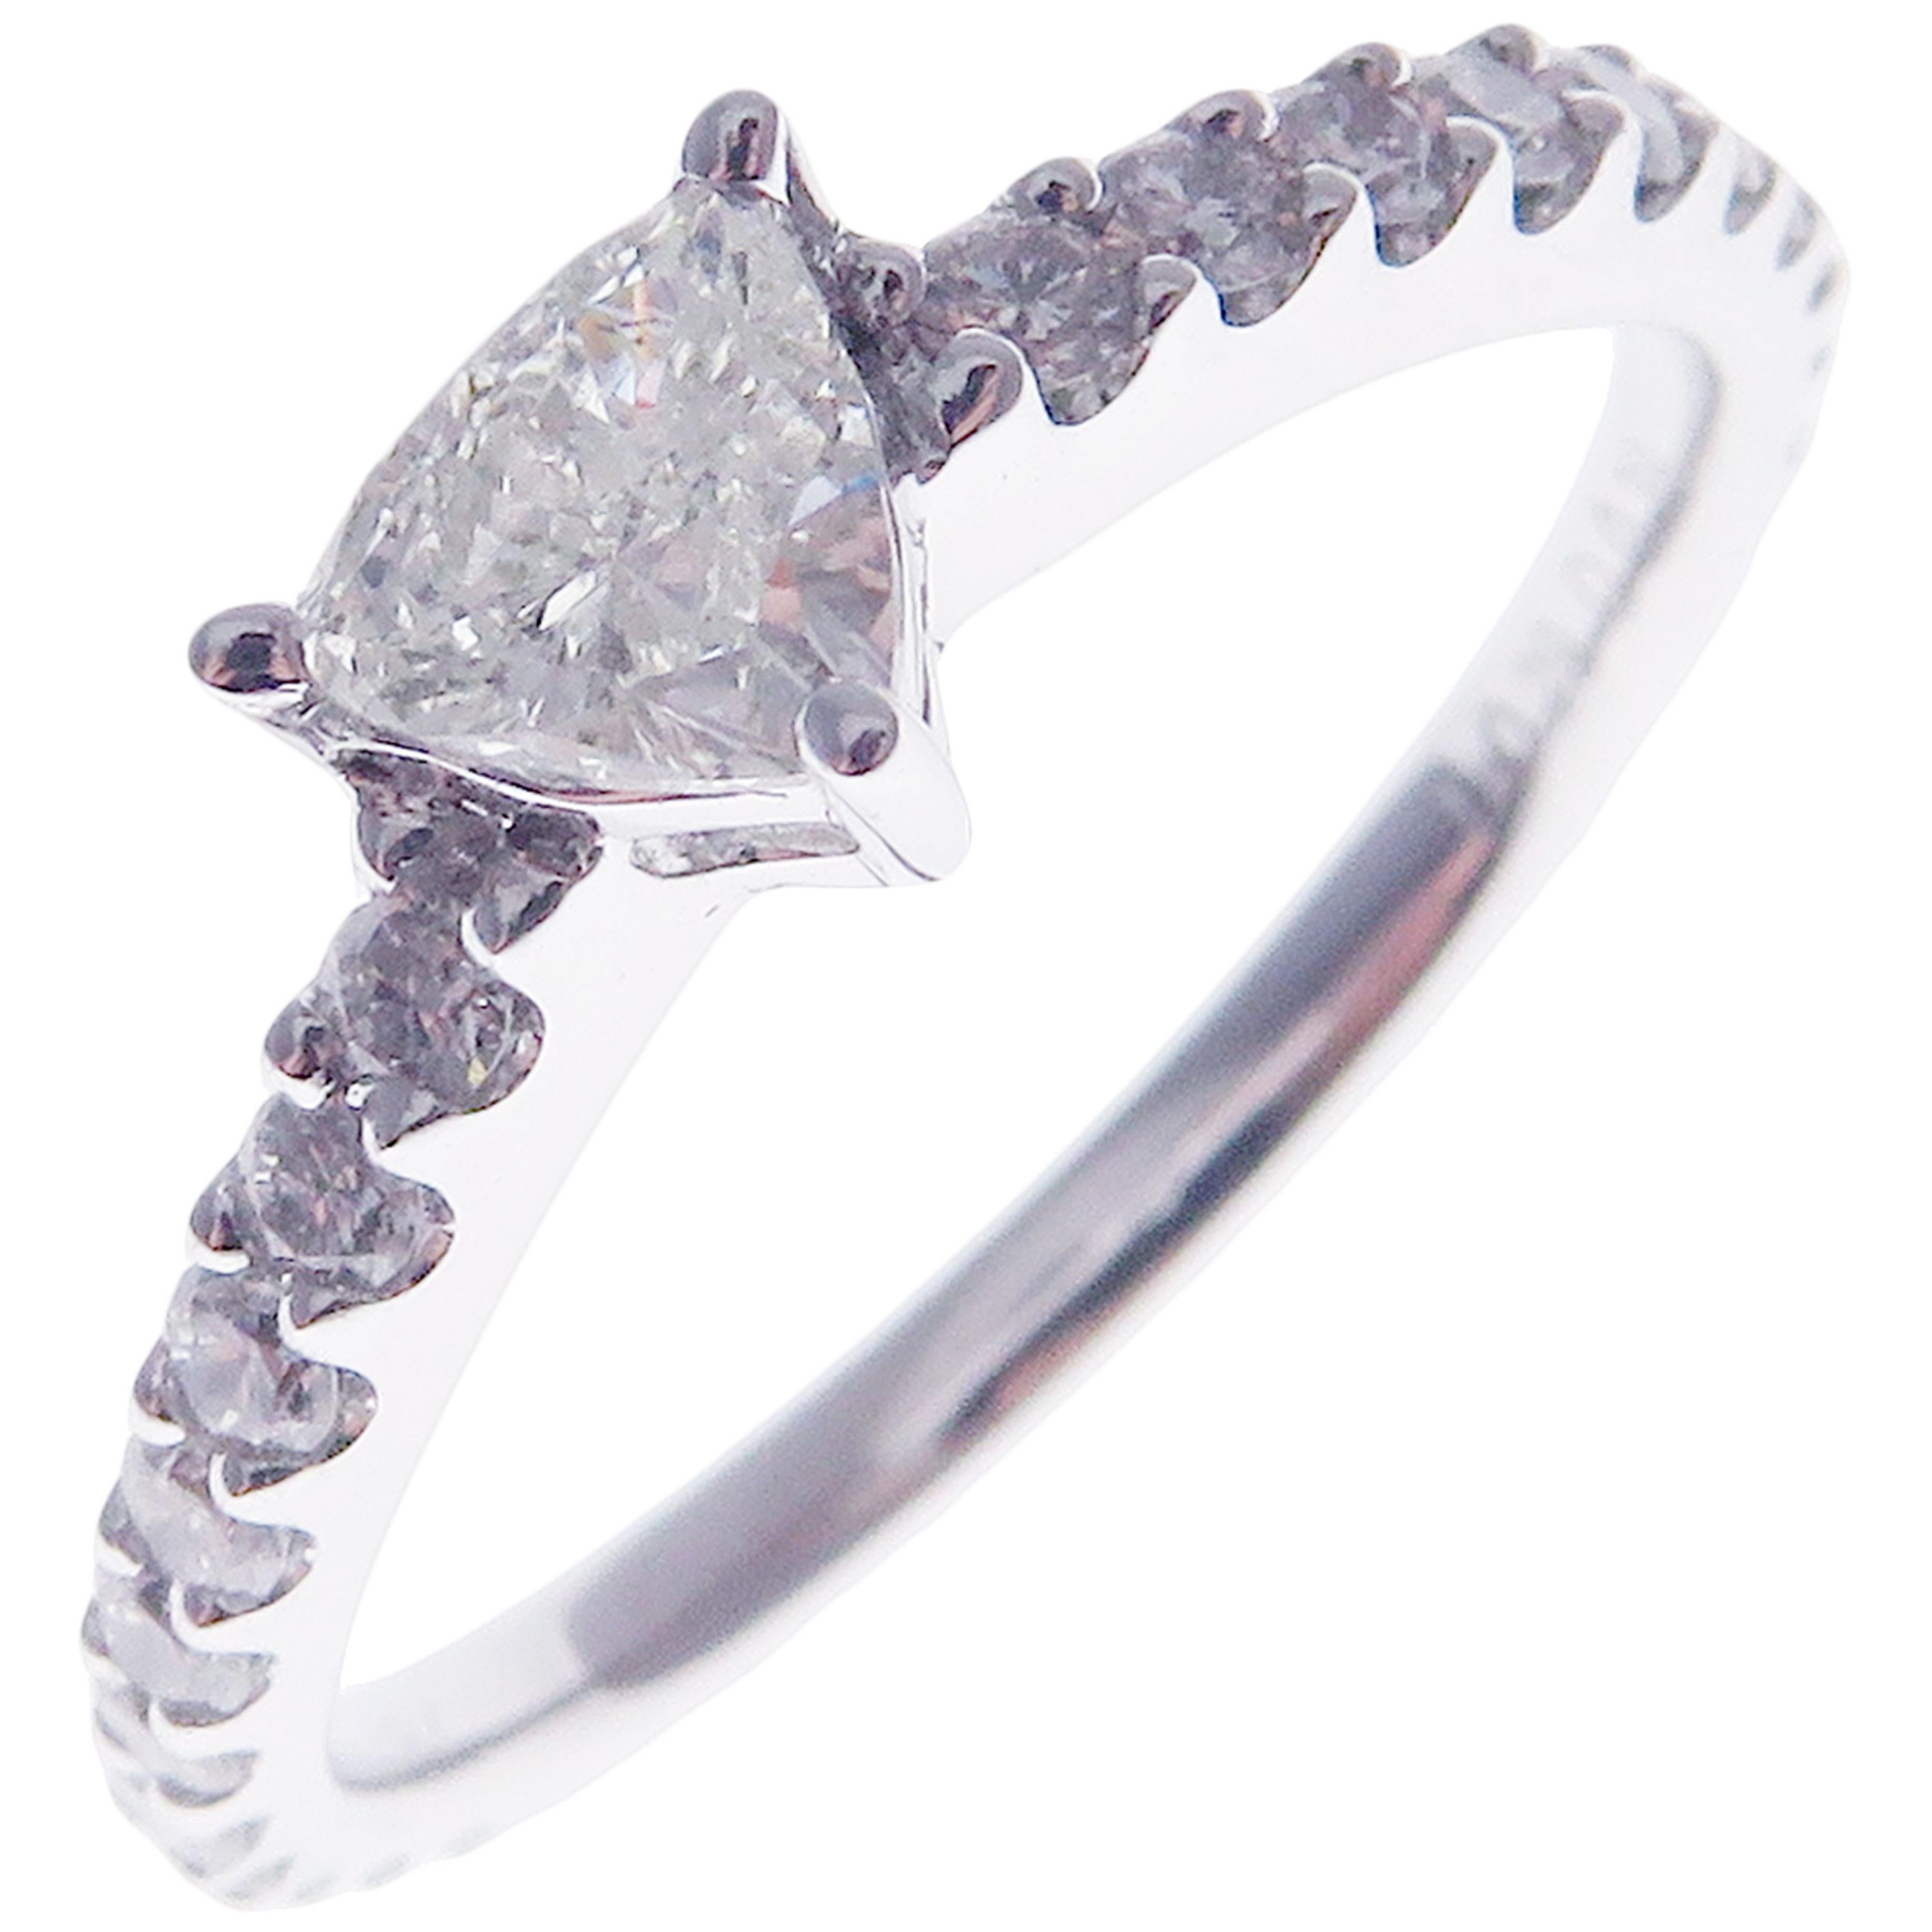 This diamond solitaire ring is crafted in 18-karat white gold, featuring 24 round white diamonds totaling of 0.39 carats with the center stone of triangle cut diamond totaling of 0.29 carats.
Approximate total weight 1.85 grams.
Standard Ring size